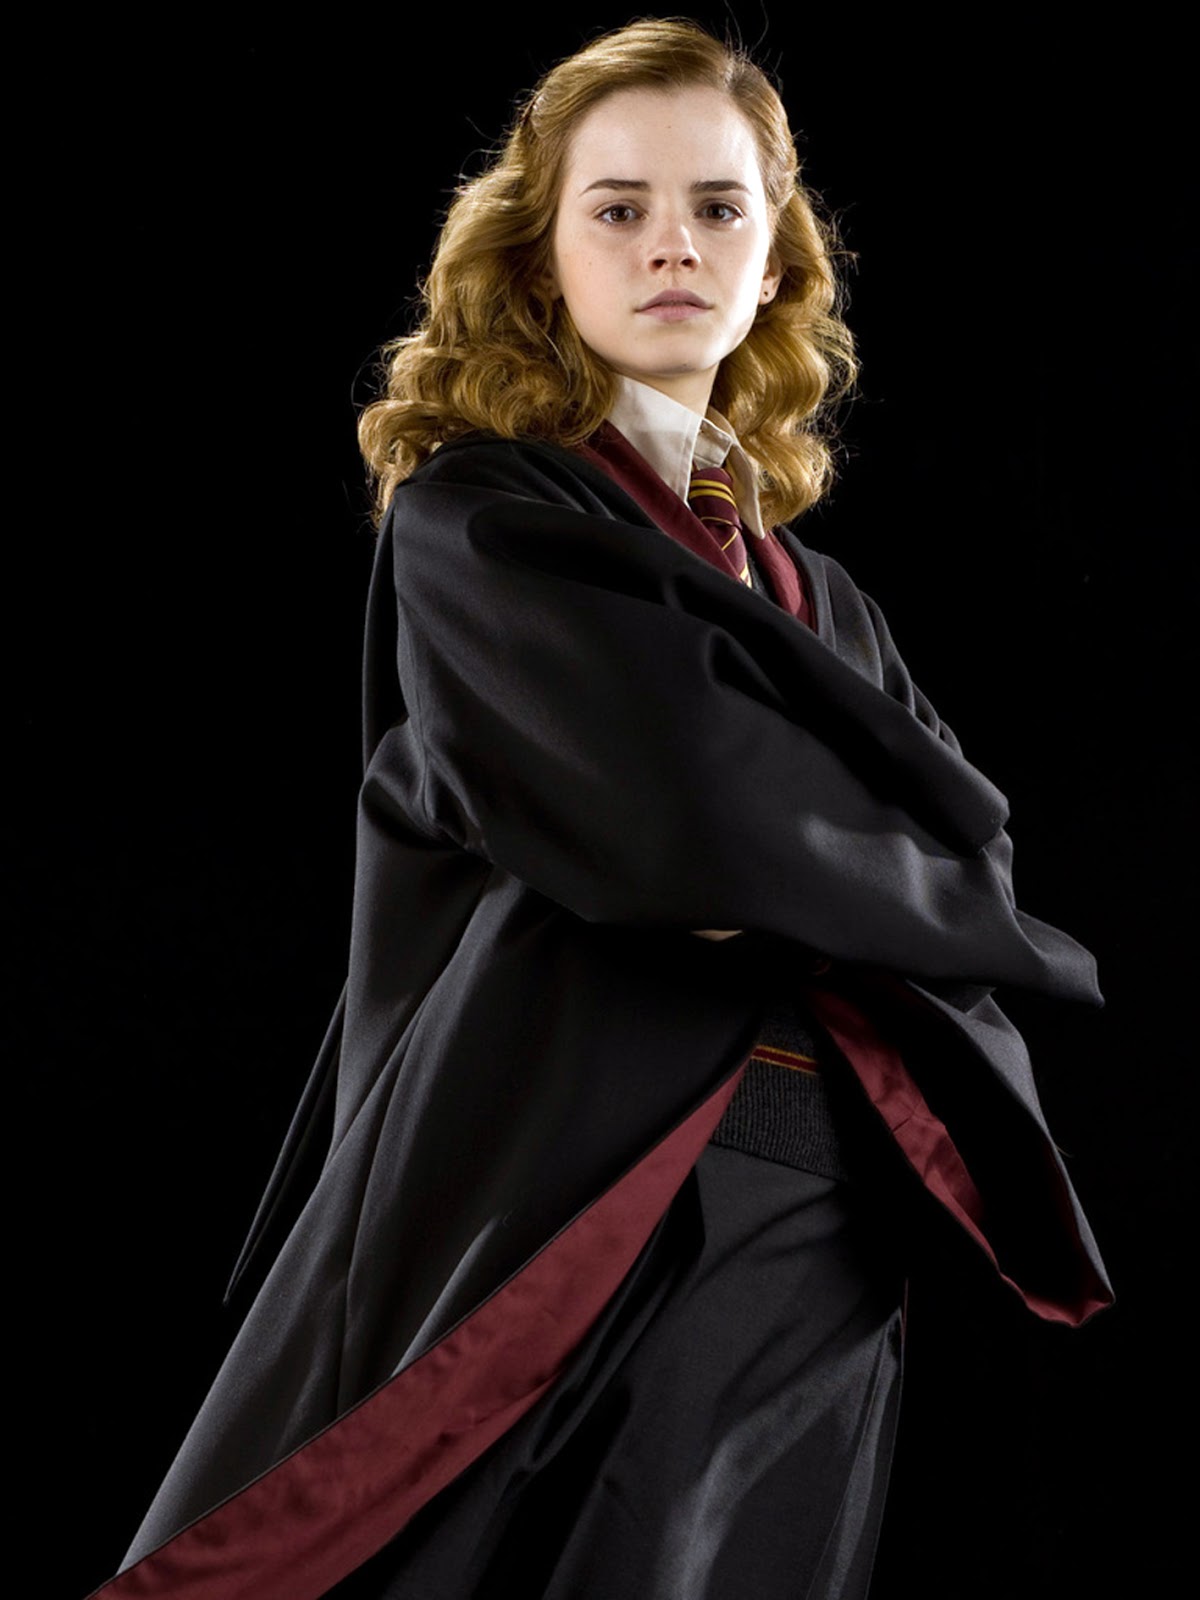 hermione granger real name hermione granger ronald weasley hermione granger role hermione granger race hermione granger ravenclaw hermione granger ron weasley hermione granger ringtone hermione granger real life hermione granger ron weasley kissing scene hermione granger ron weasley tumblr